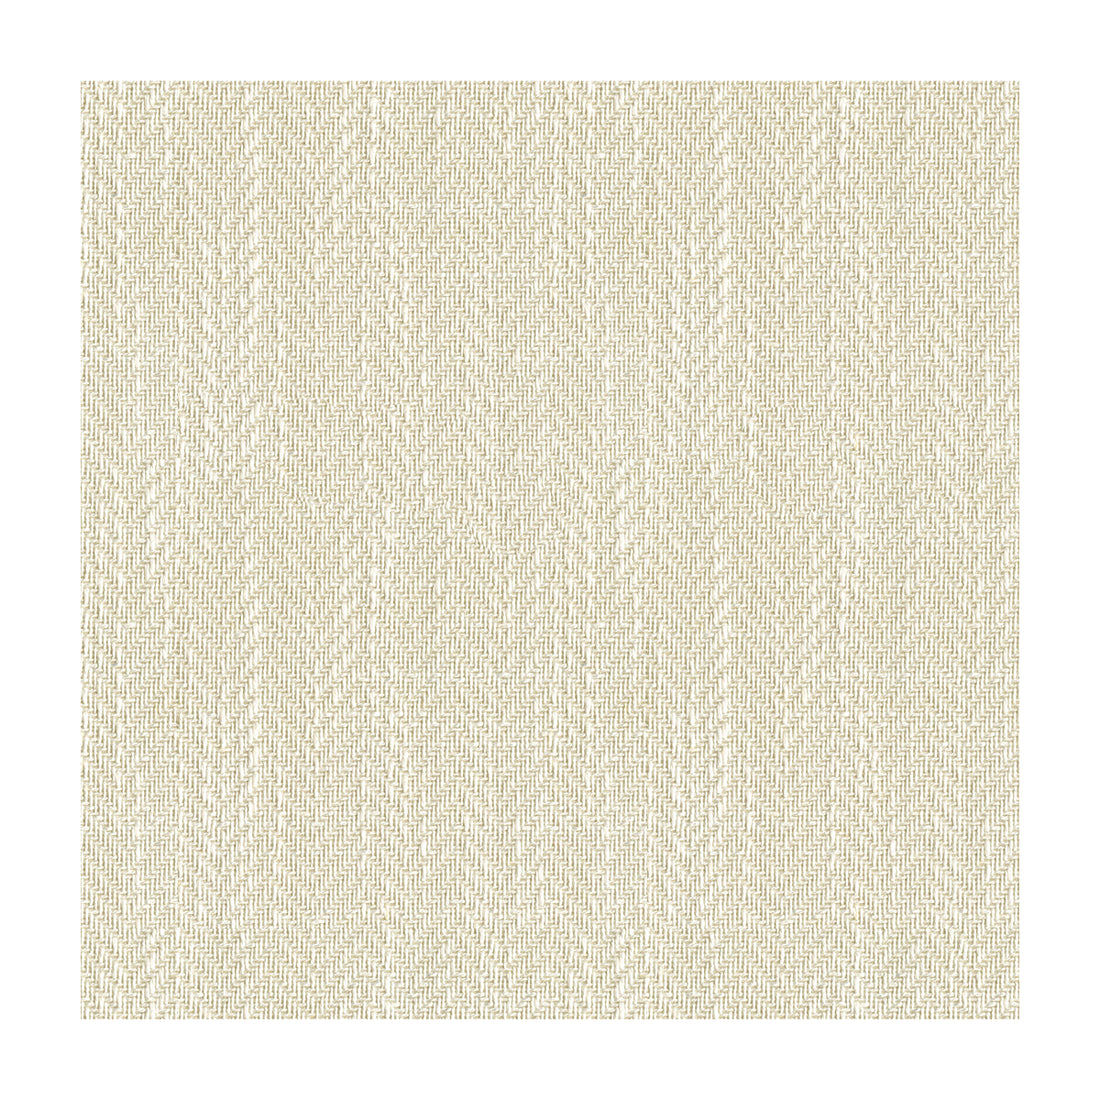 Kravet Basics fabric in 33766-1 color - pattern 33766.1.0 - by Kravet Basics in the Perfect Plains collection